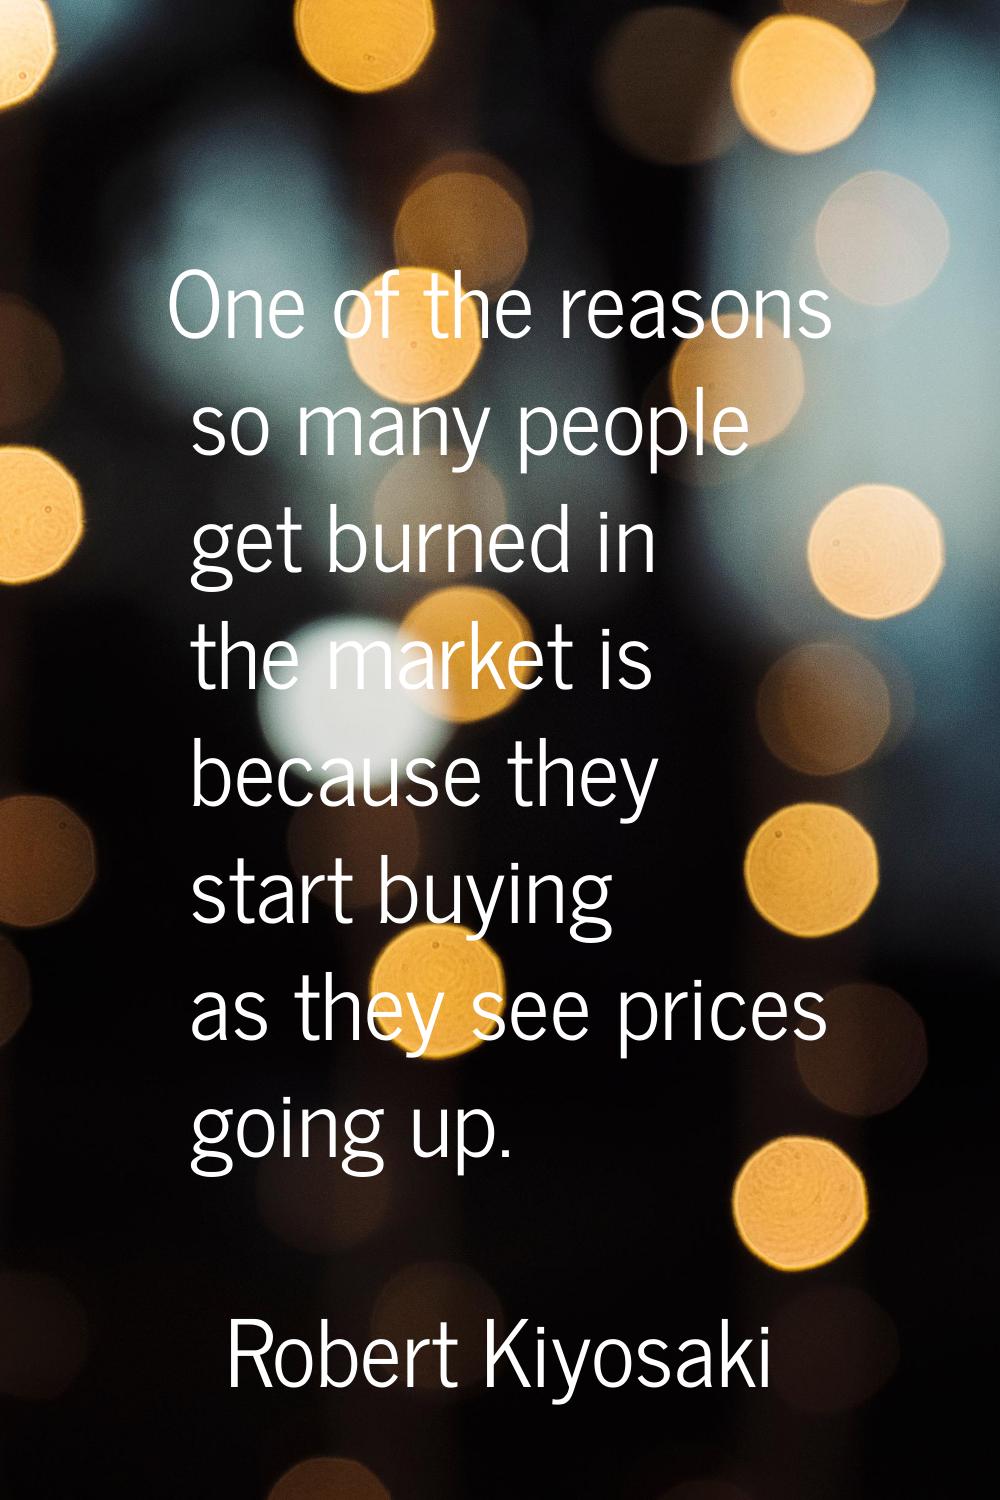 One of the reasons so many people get burned in the market is because they start buying as they see